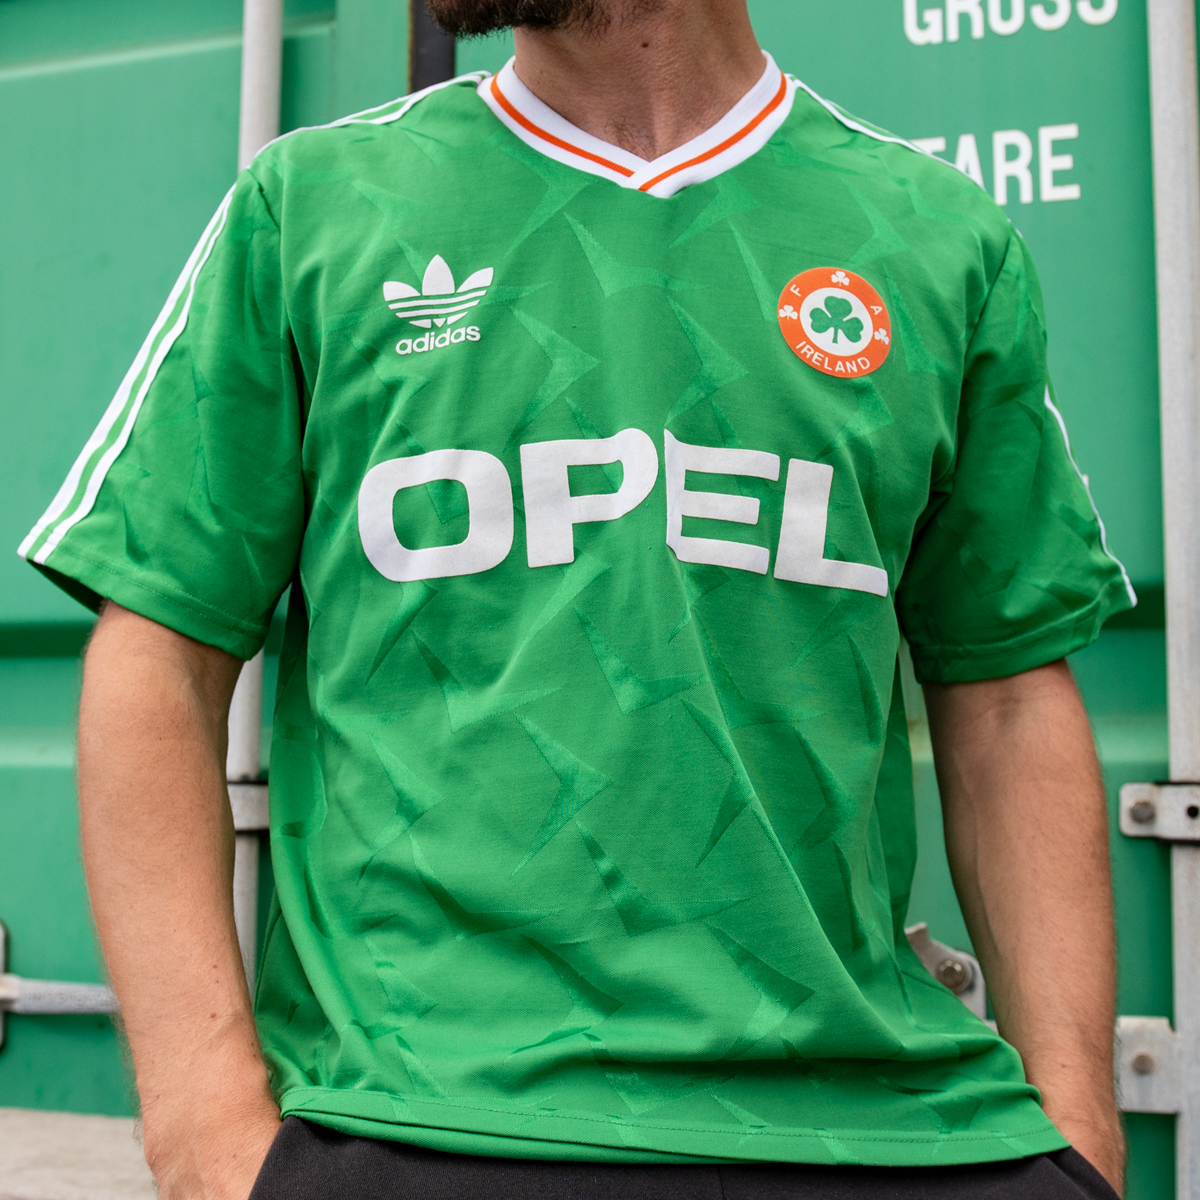 Classic Football Shirts on Twitter: "Ireland 1990 Home 🇮🇪 Glorious home shirt at the 1990 World Cup where they reached the Quarter Finals. Hitting the site on August